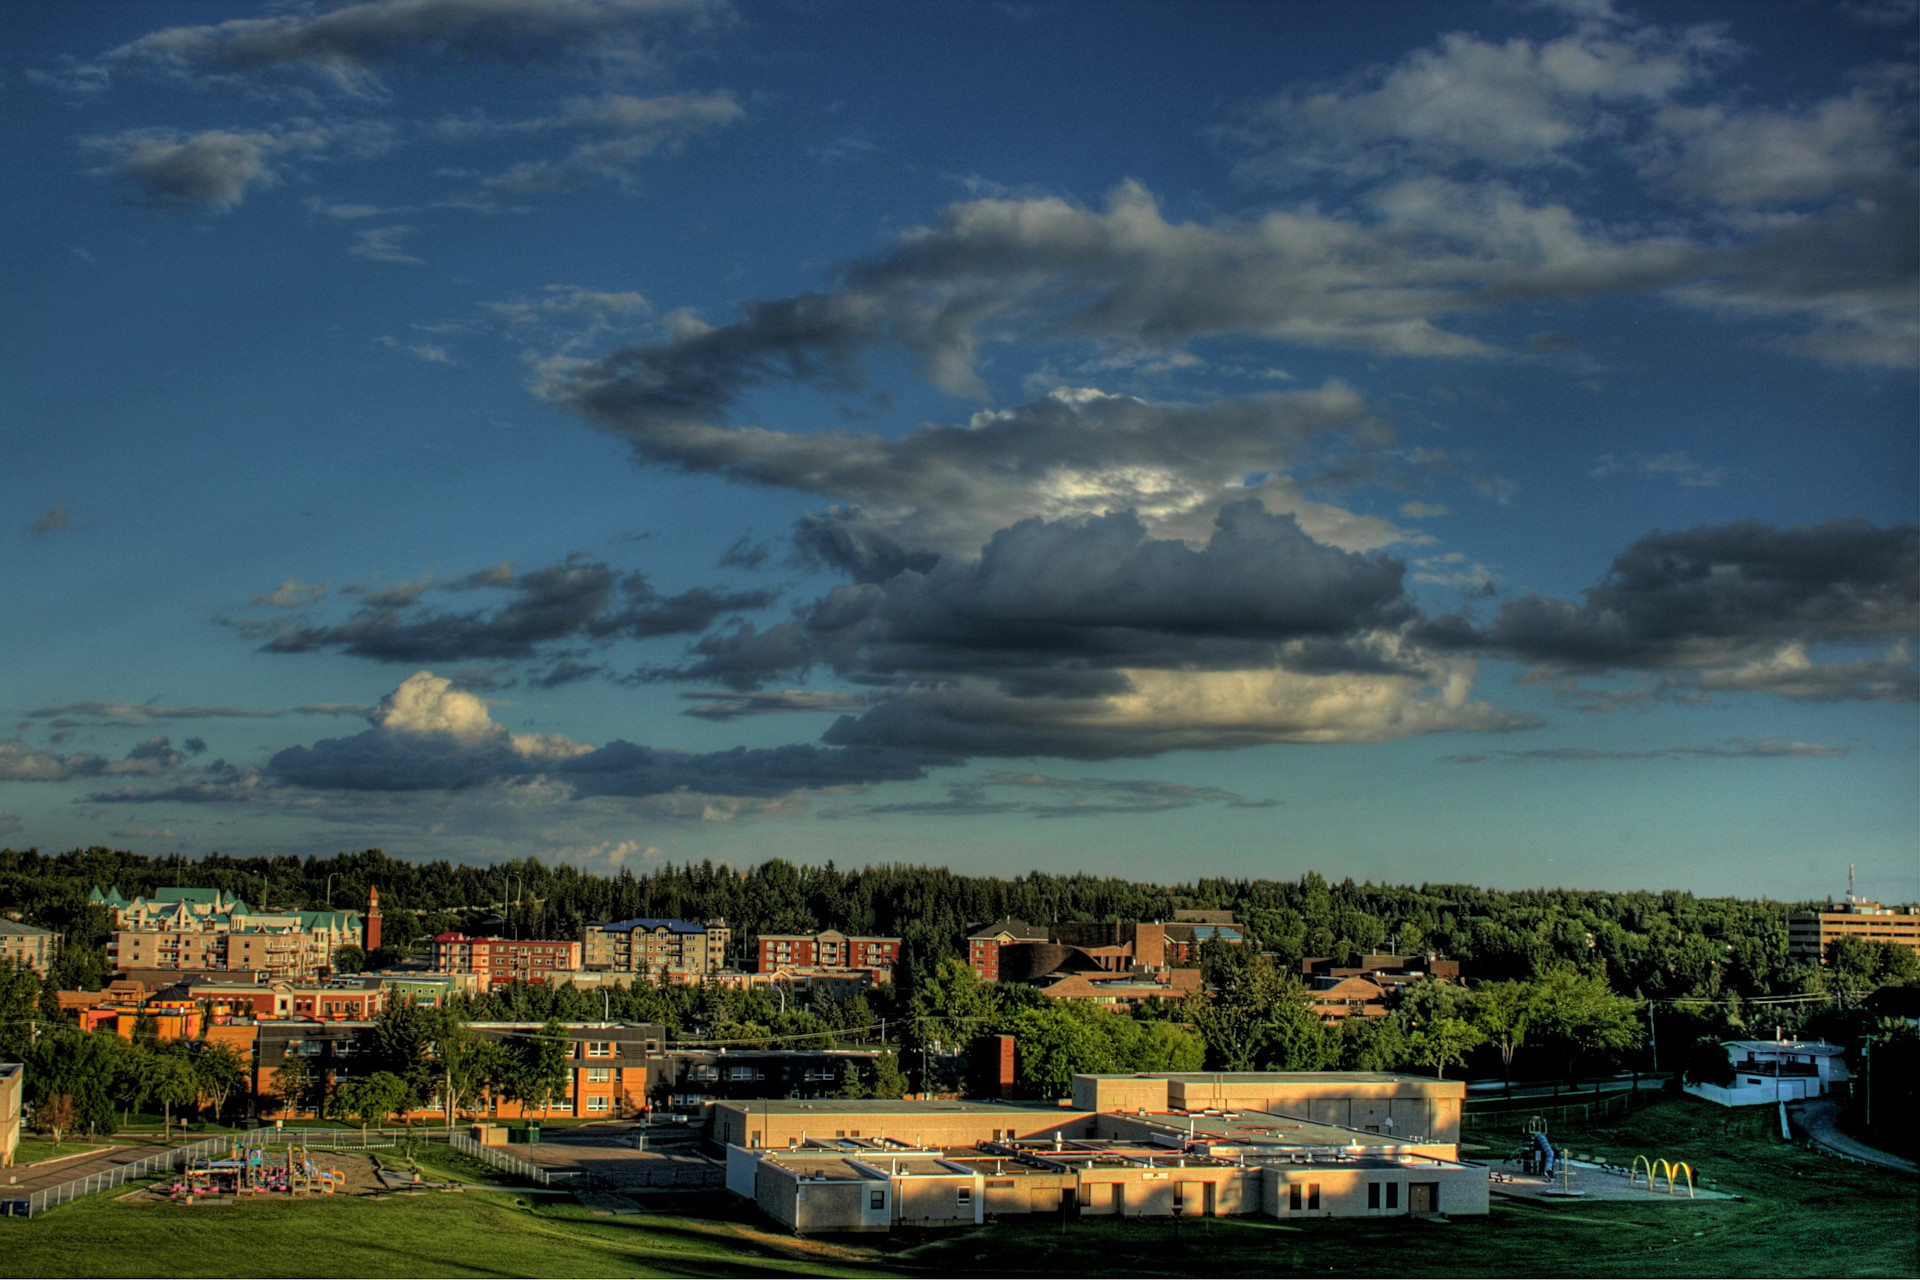 Panoramic view of the old downtown city center in St. Albert with trees in the background and covering the sky that has some clouds.